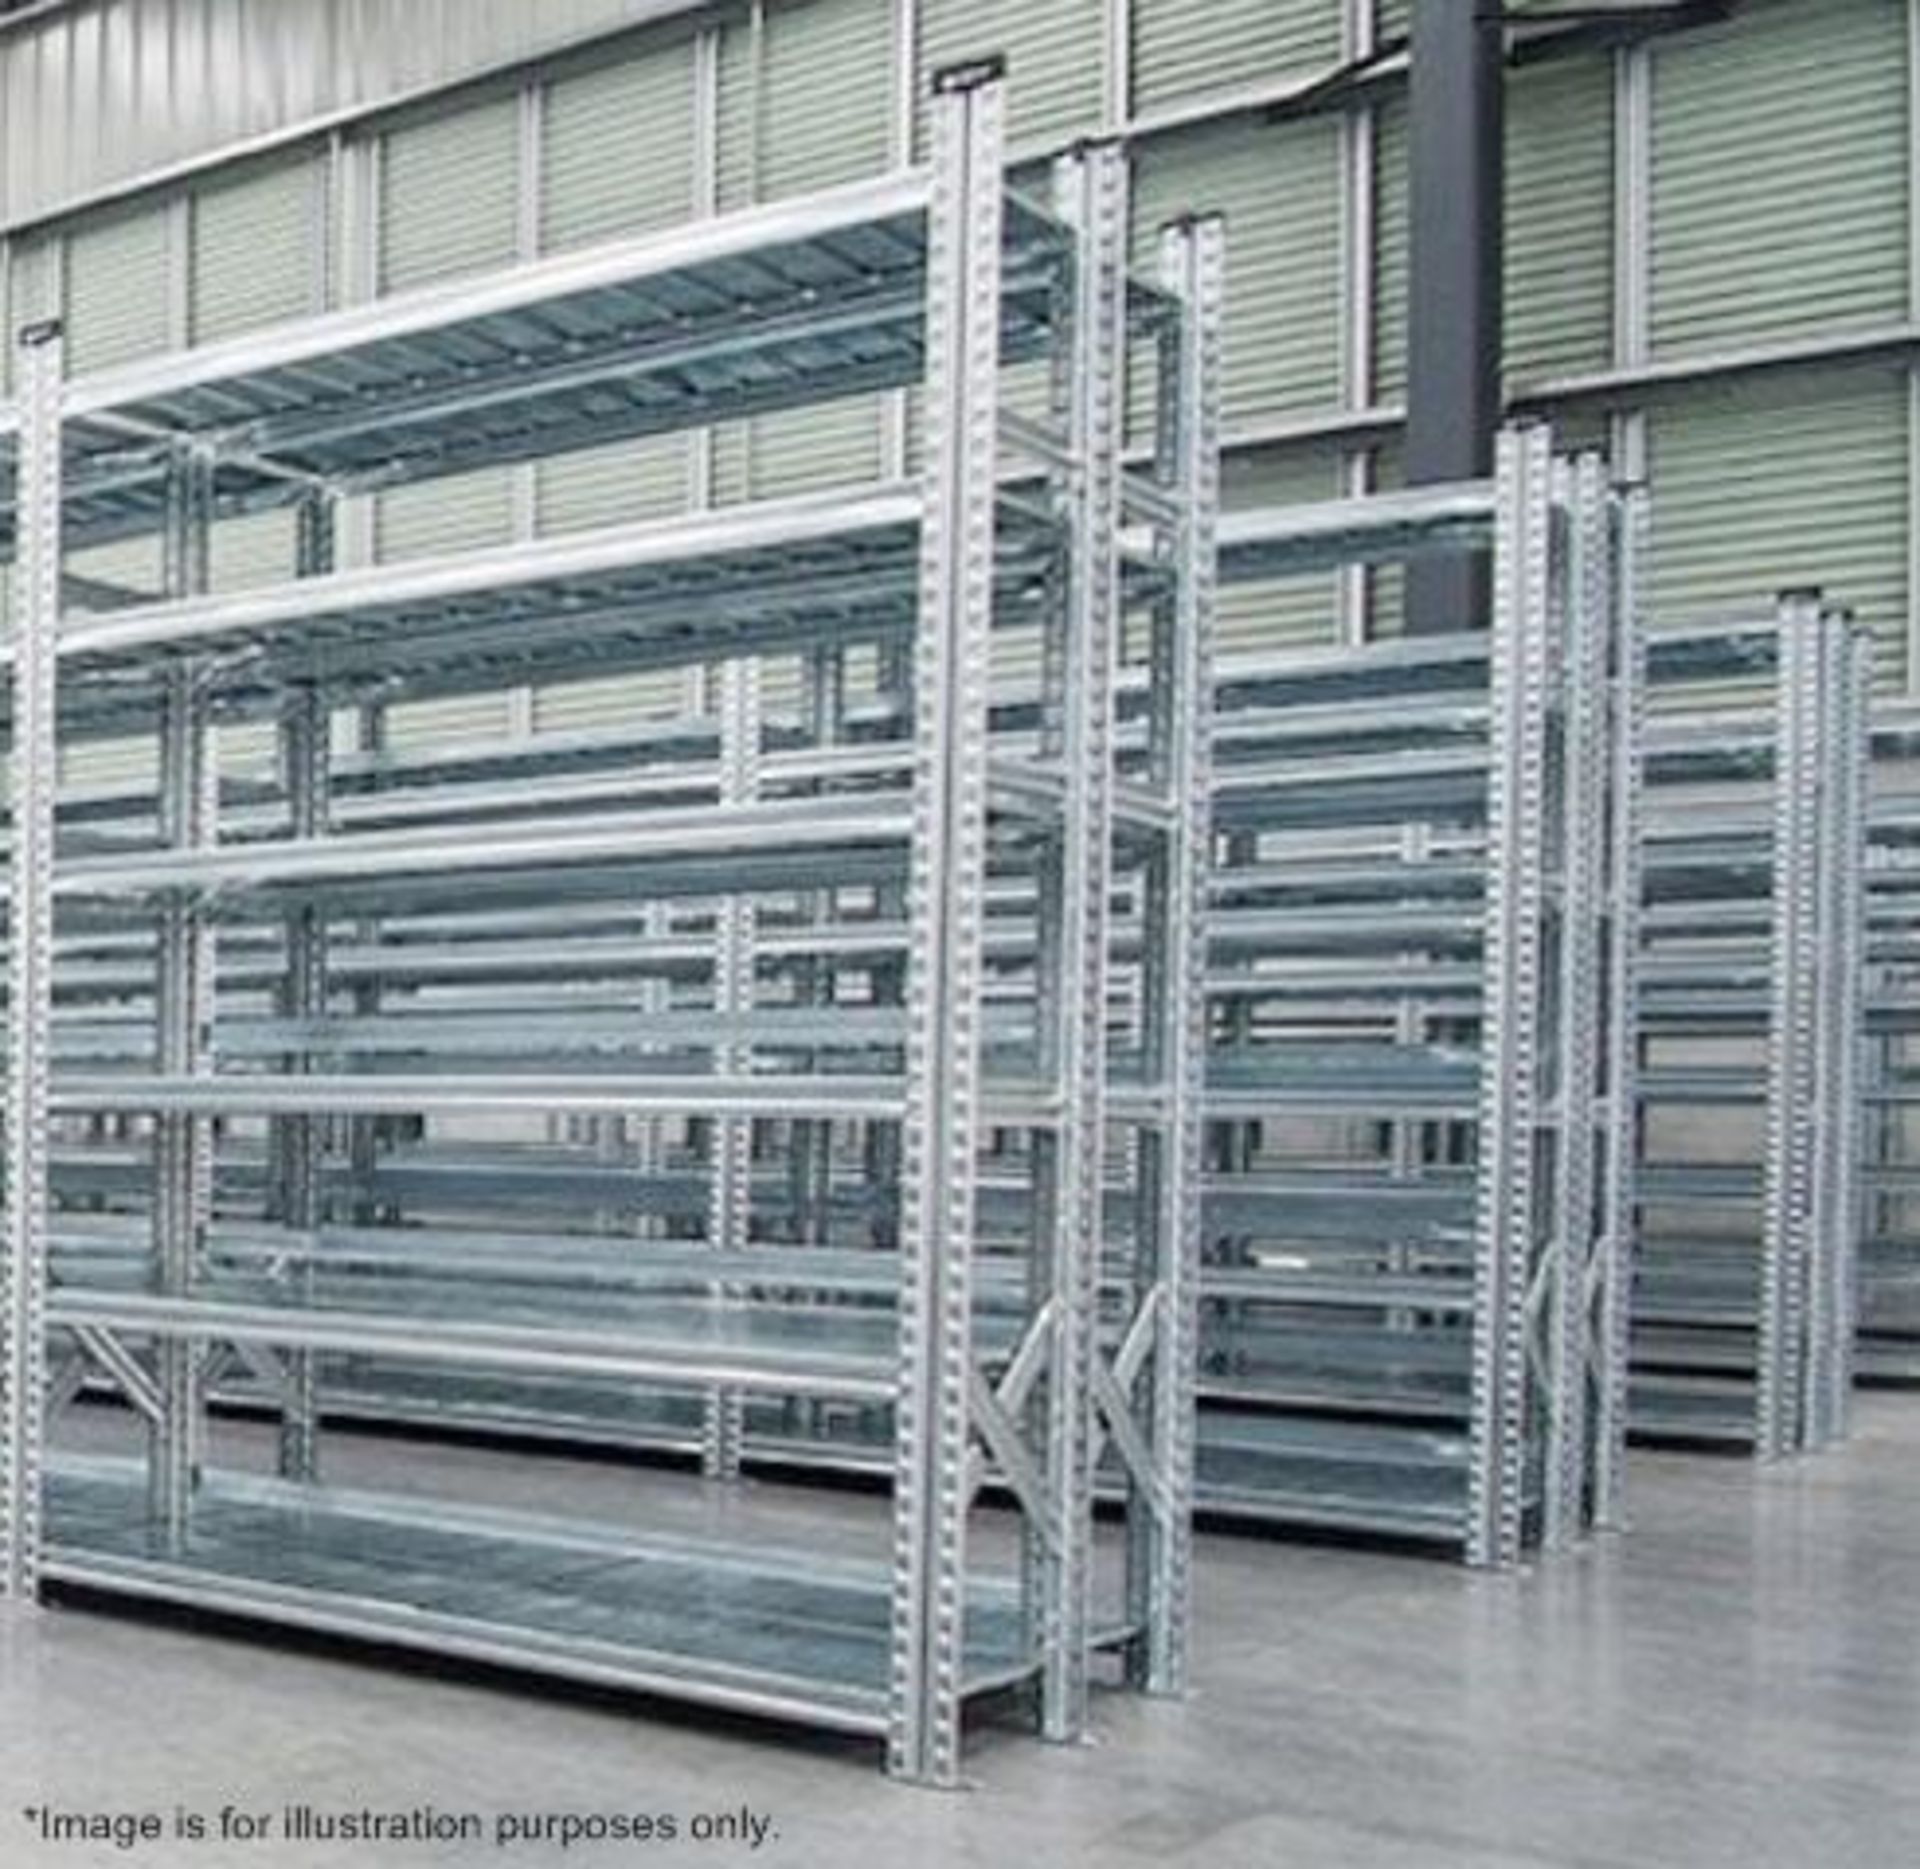 4 x Bays of Metalsistem Steel Modular Storage Shelving - Includes 53 Pieces - Recently Removed - Image 14 of 17